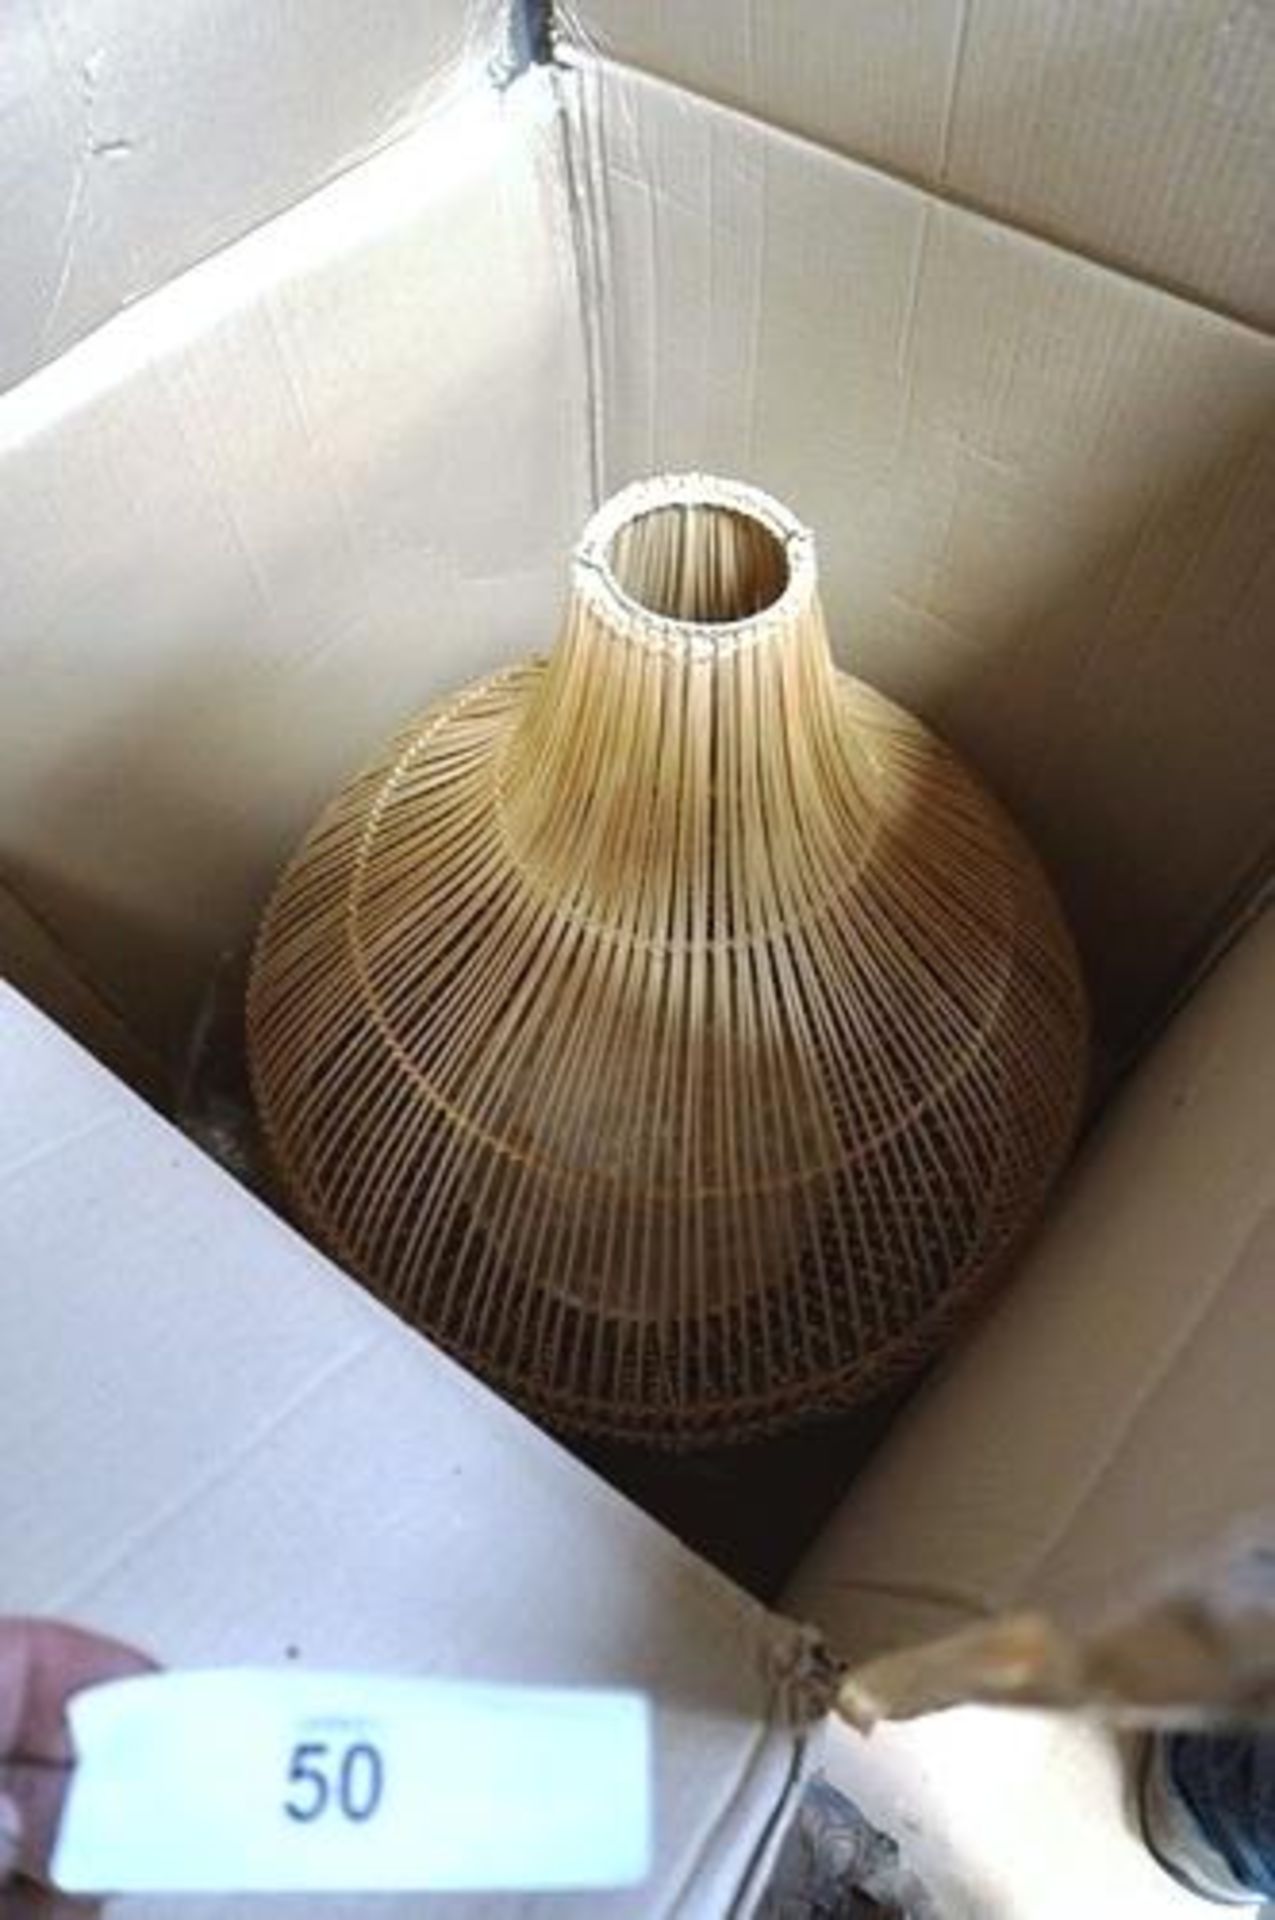 1 x wicker floor lamp, model 3296 together with 1 x unbranded wicker ceiling light shade - New in - Image 2 of 3